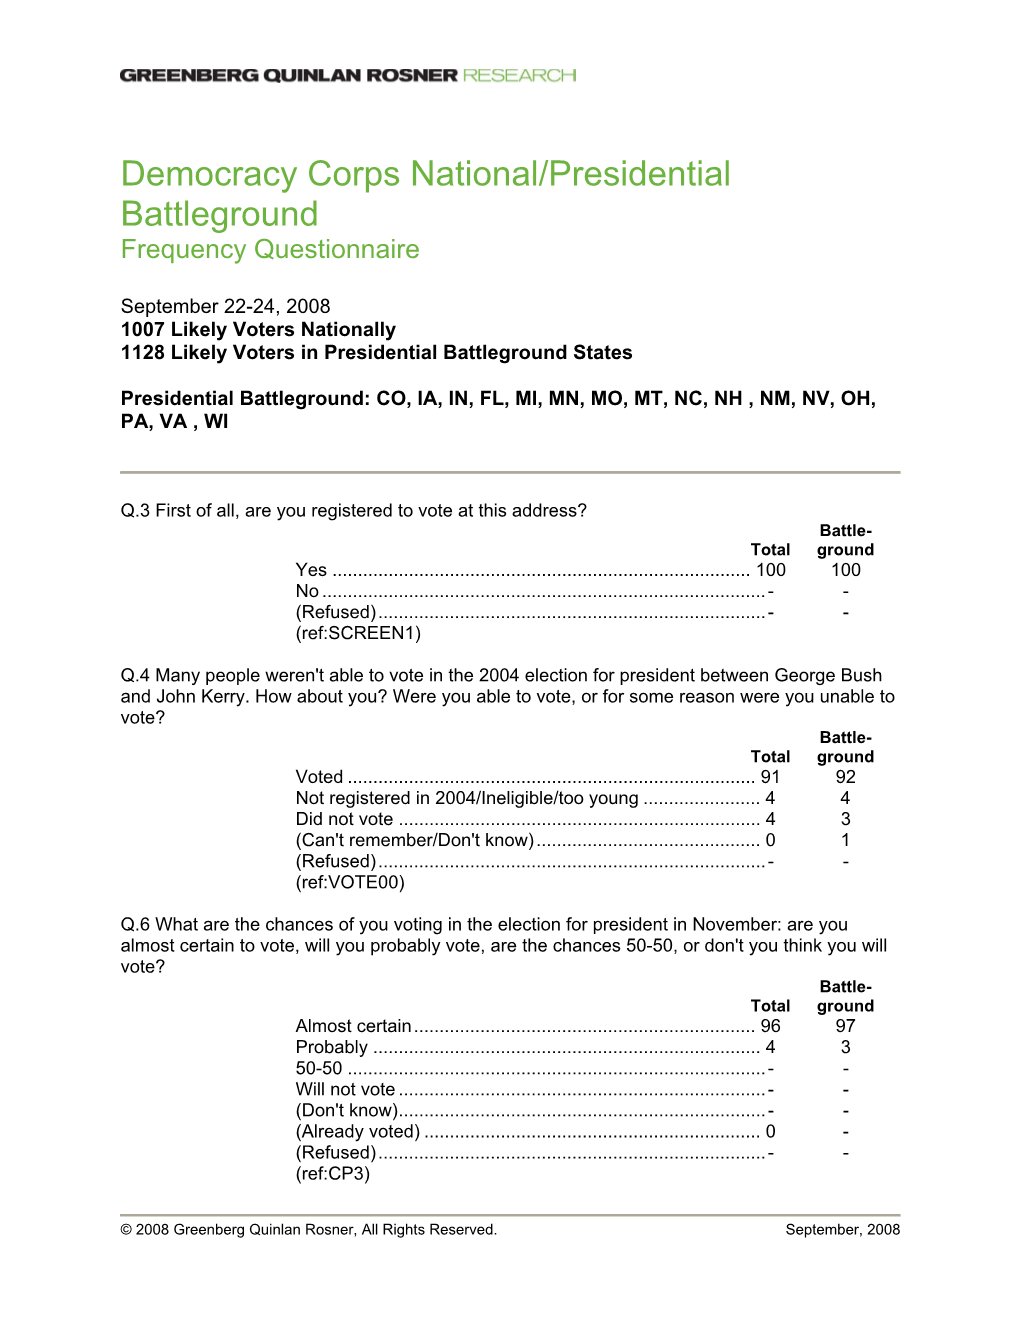 Democracy Corps National/Presidential Battleground Frequency Questionnaire